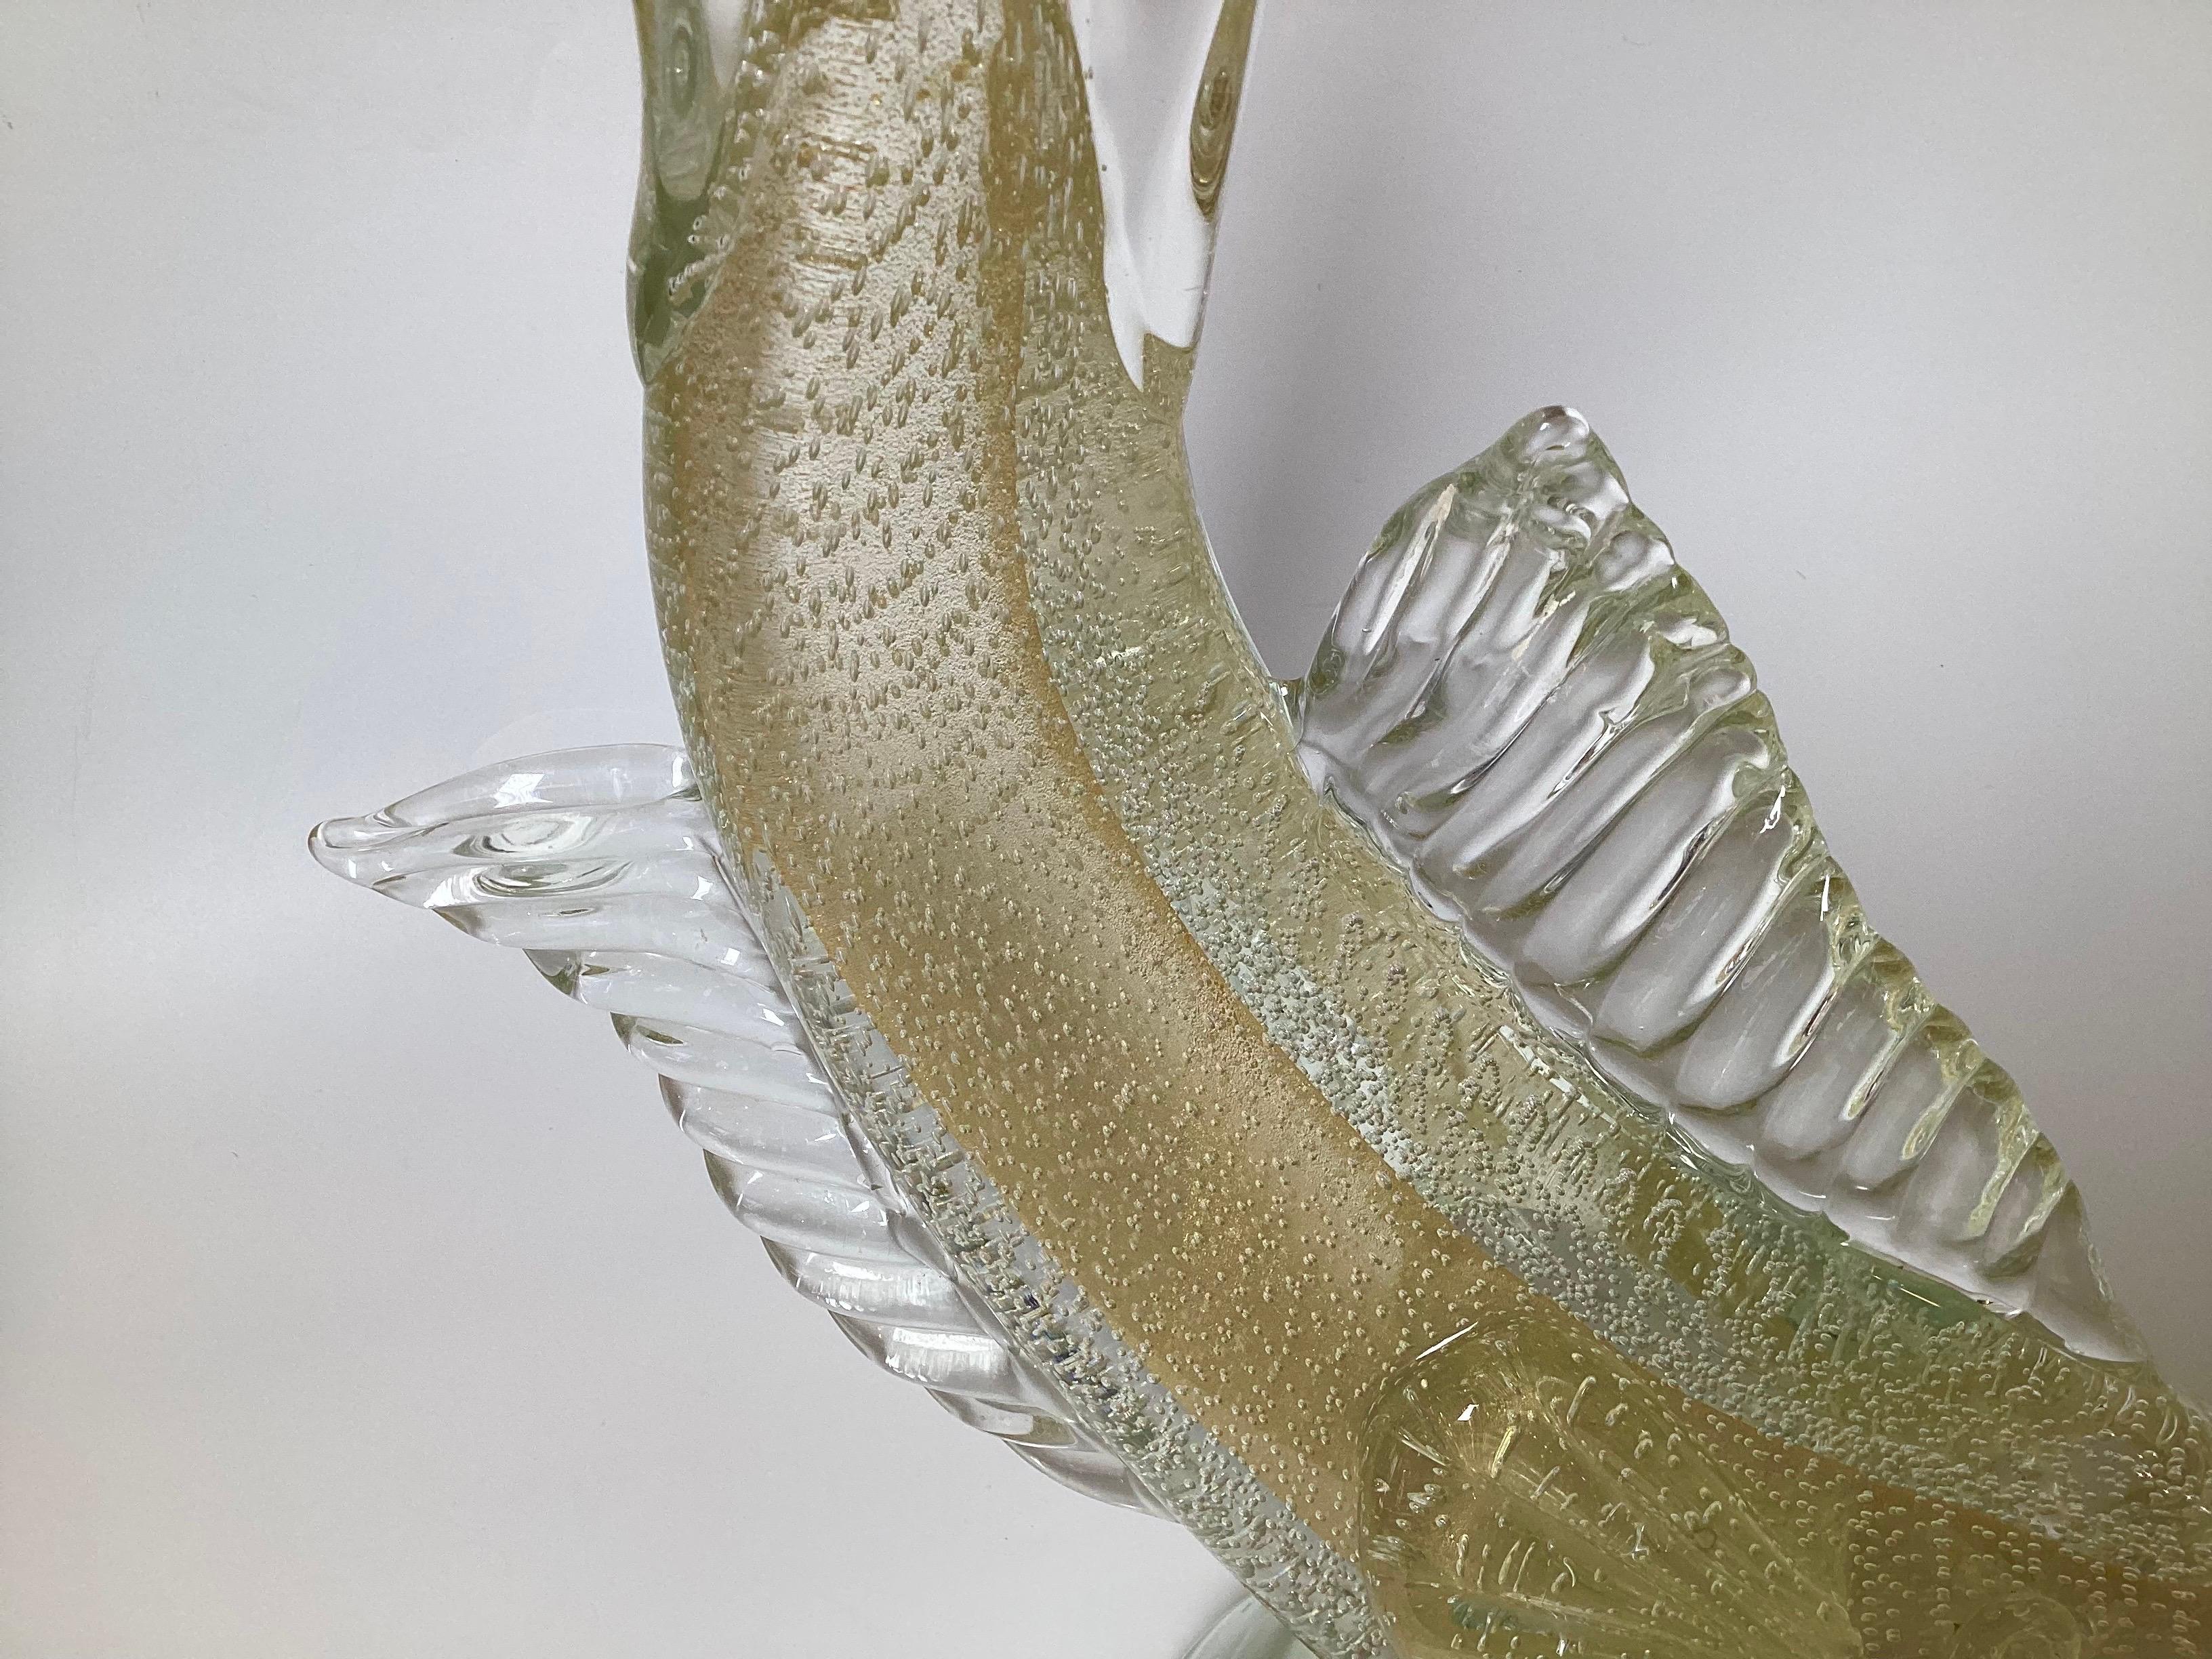 Mid-20th Century A Large Saliati Murano Glass Fish with Gold Flecks Mid 20th Century For Sale